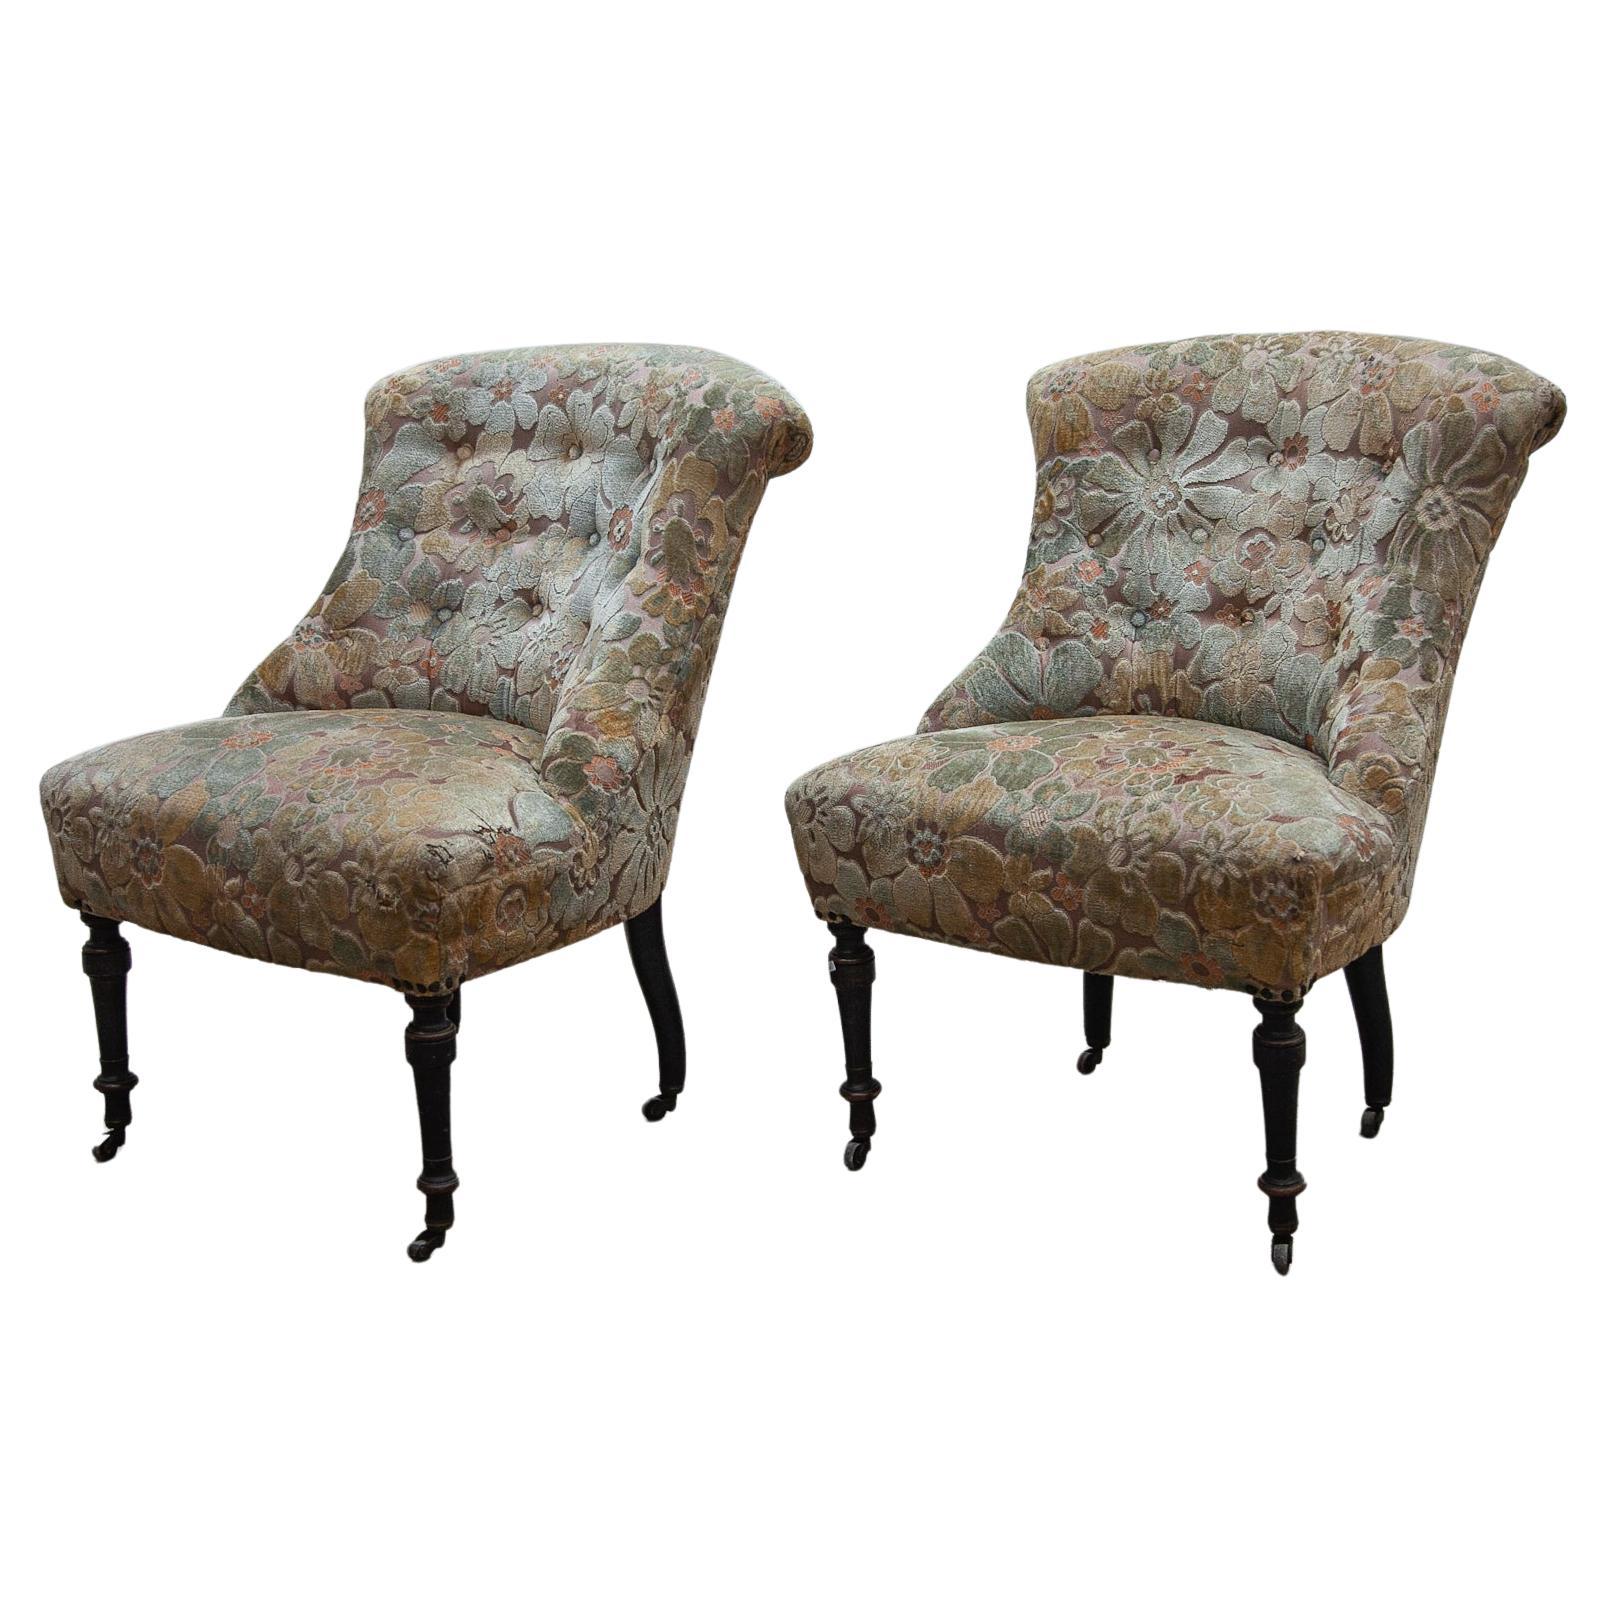 Pair of French Victorian club lounge chairs 19th century in good condition in velvet flower upholstery a perfect antique set for your interior modern or cottage style. Period in English furniture during the reign of Queen Victoria 1837-1901.